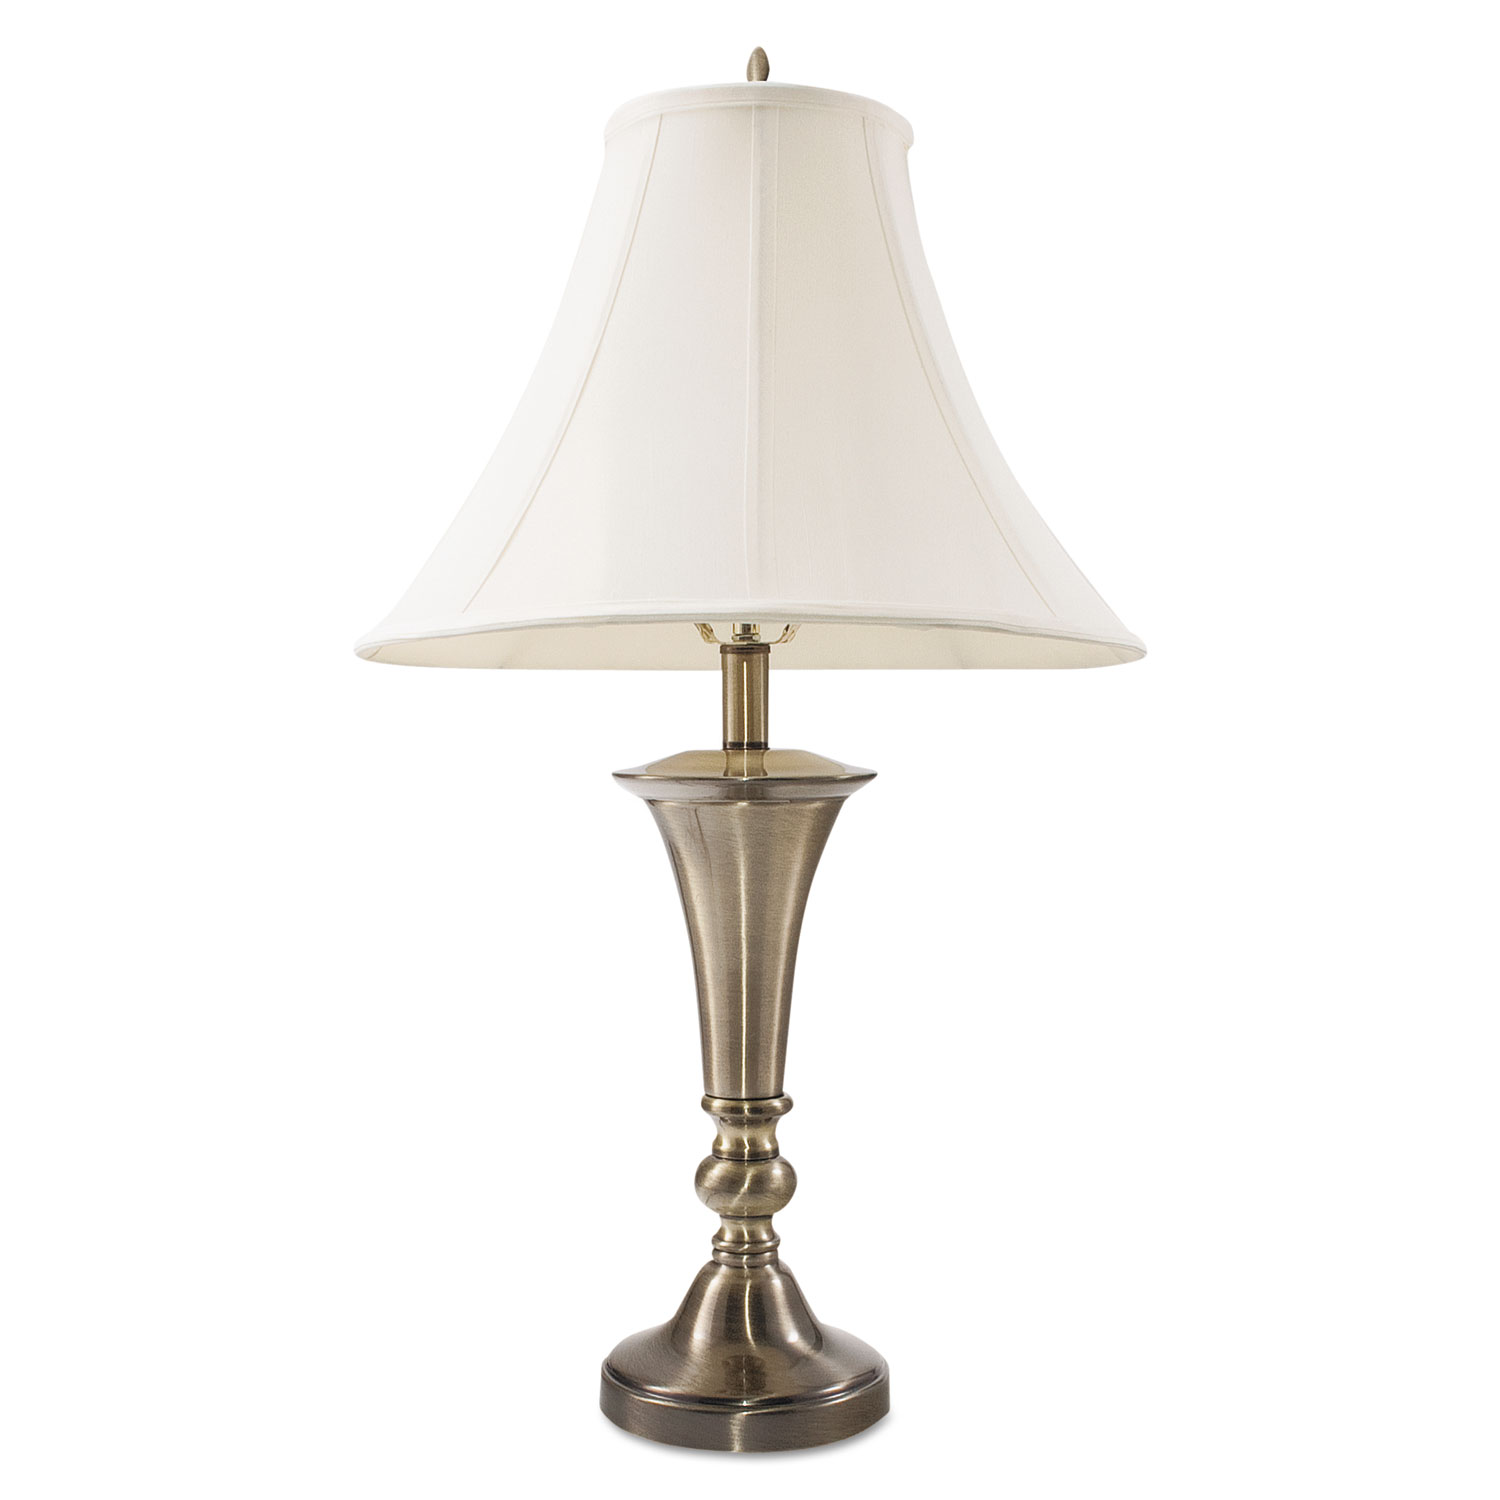 Three-Way Incandescent Table Lamp with Bell Shade, 27-3/4h, Antique Brass